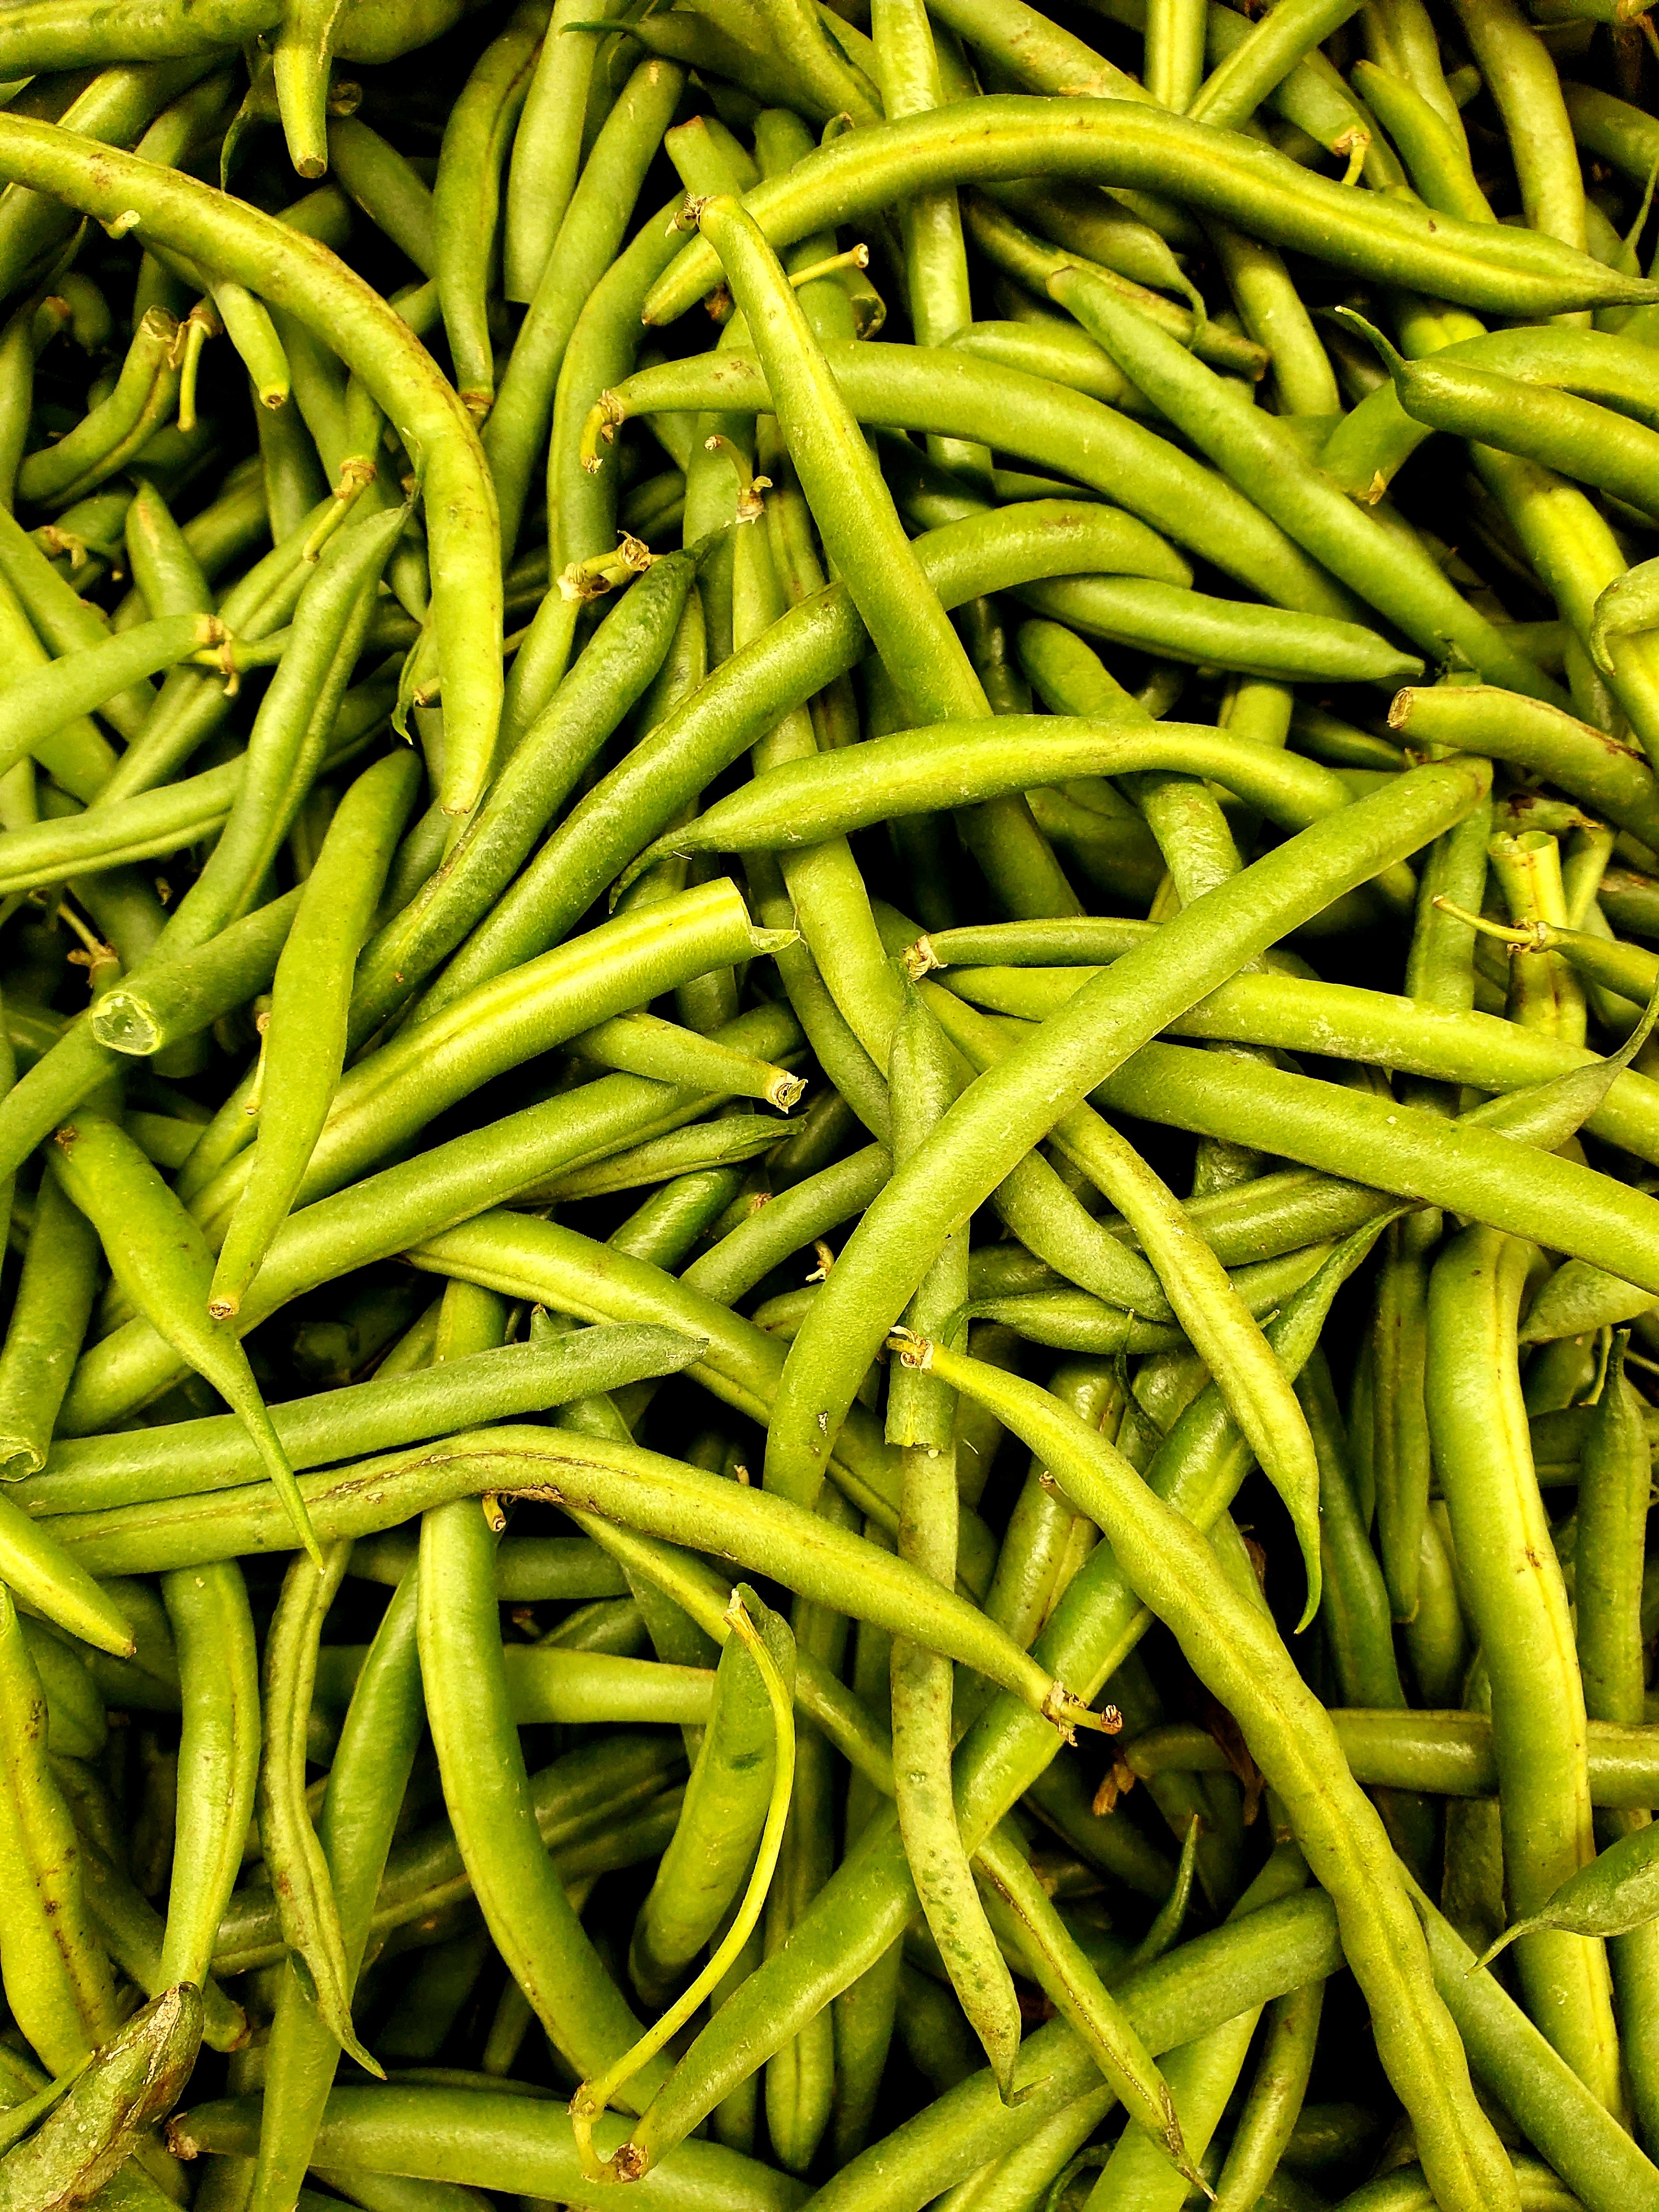 String bean grows well in a greenhouse: picture by pexels-bridgette-lynn-5352037